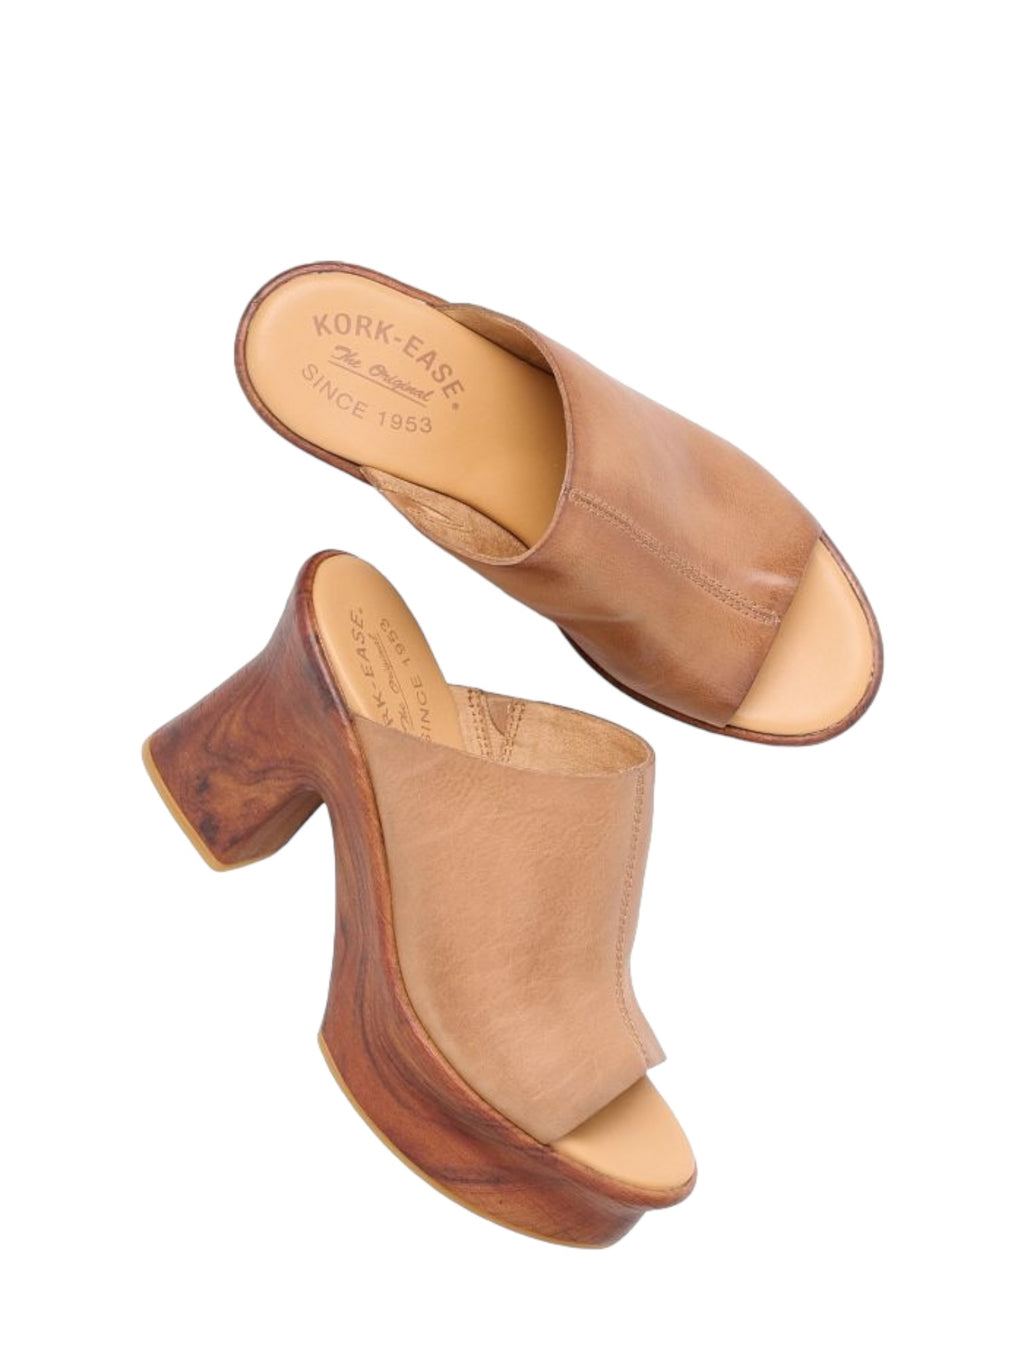 Brown leather platform heel with cushioned footbed and faux wood heel, perfect for stylish comfort. Shop Kork Ease Cassia Platform Heel now!